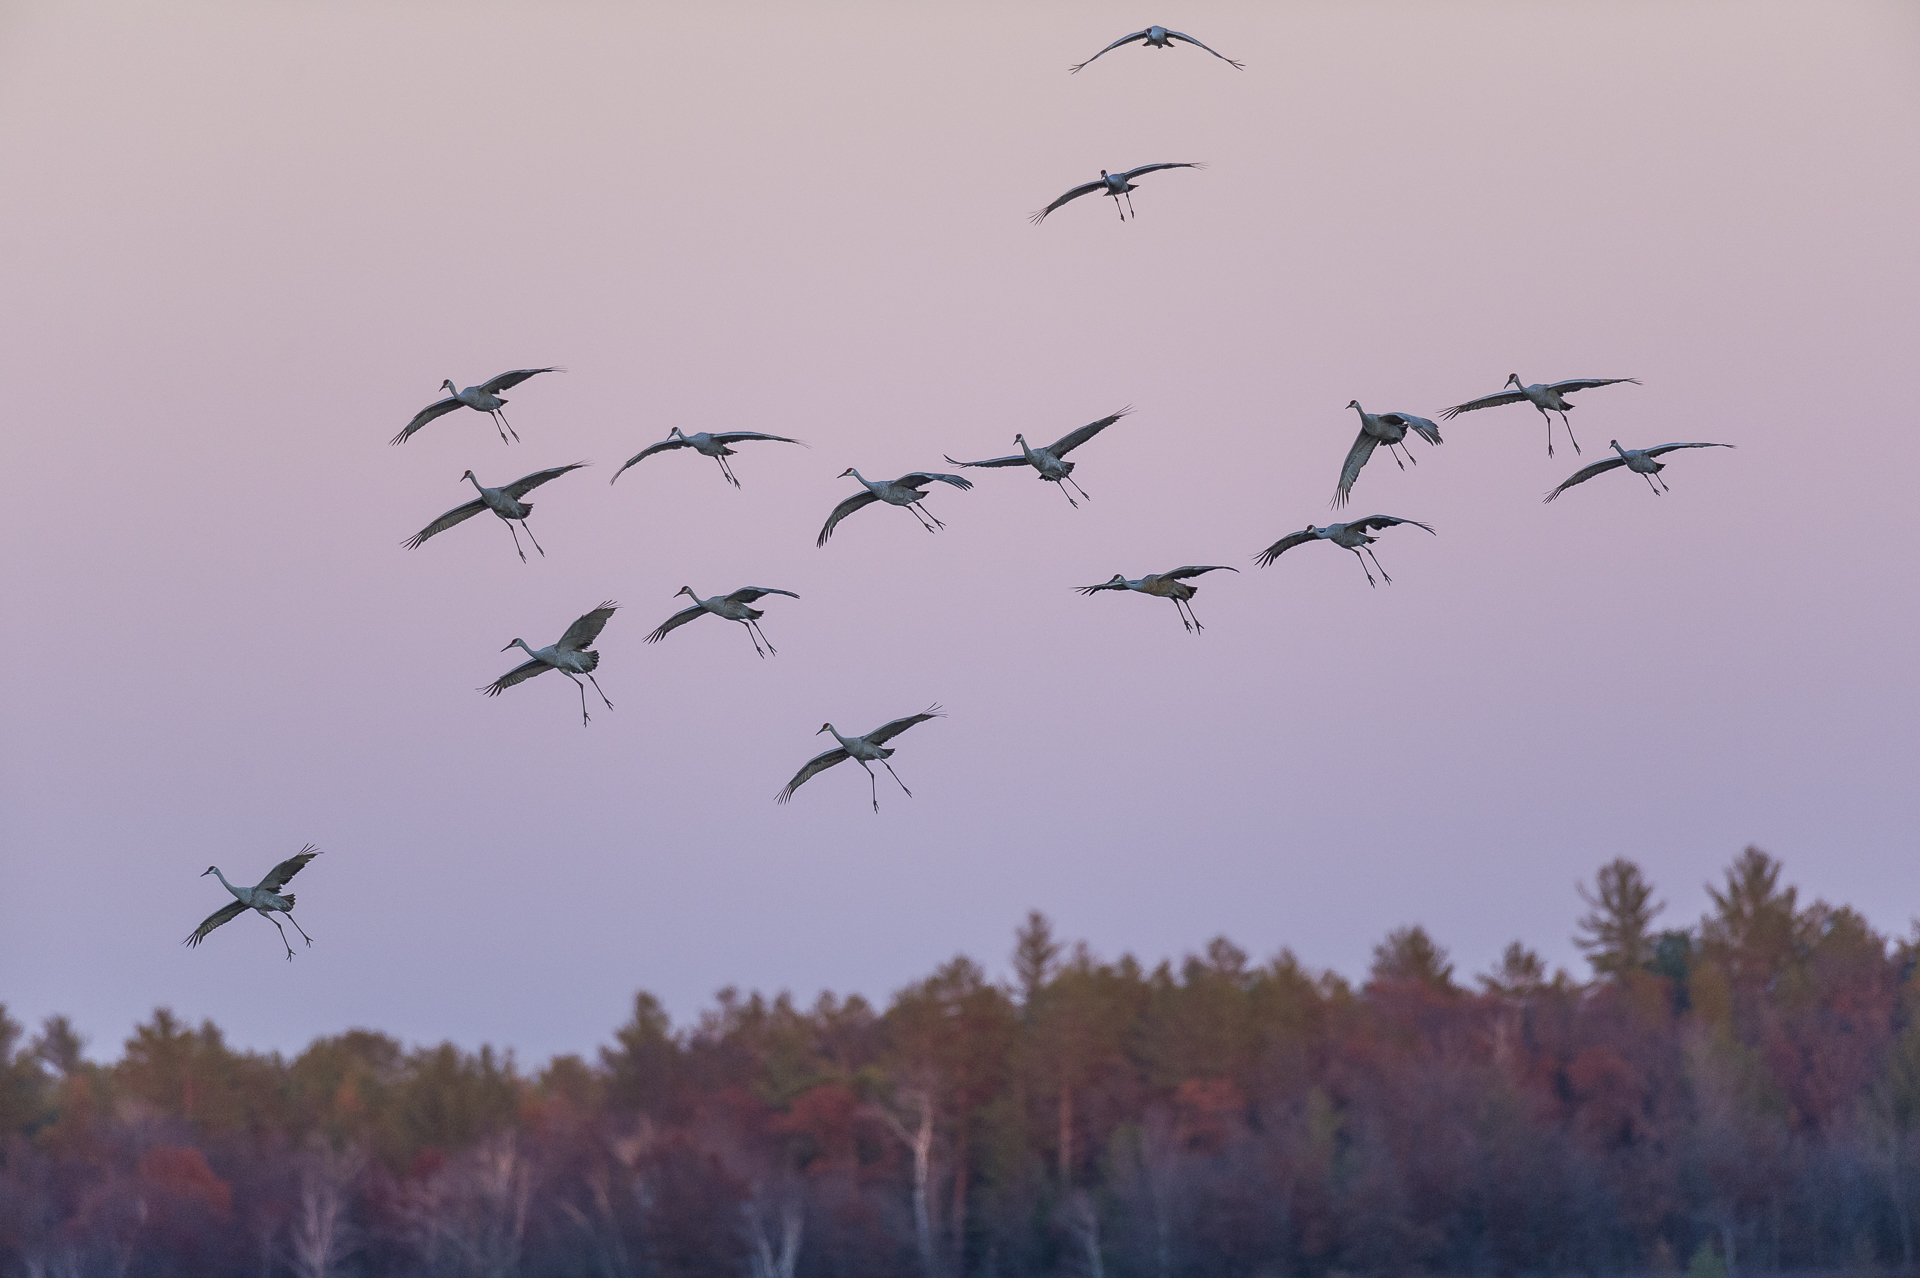 Sandhill cranes coming down to roost in wetland at sunset. 